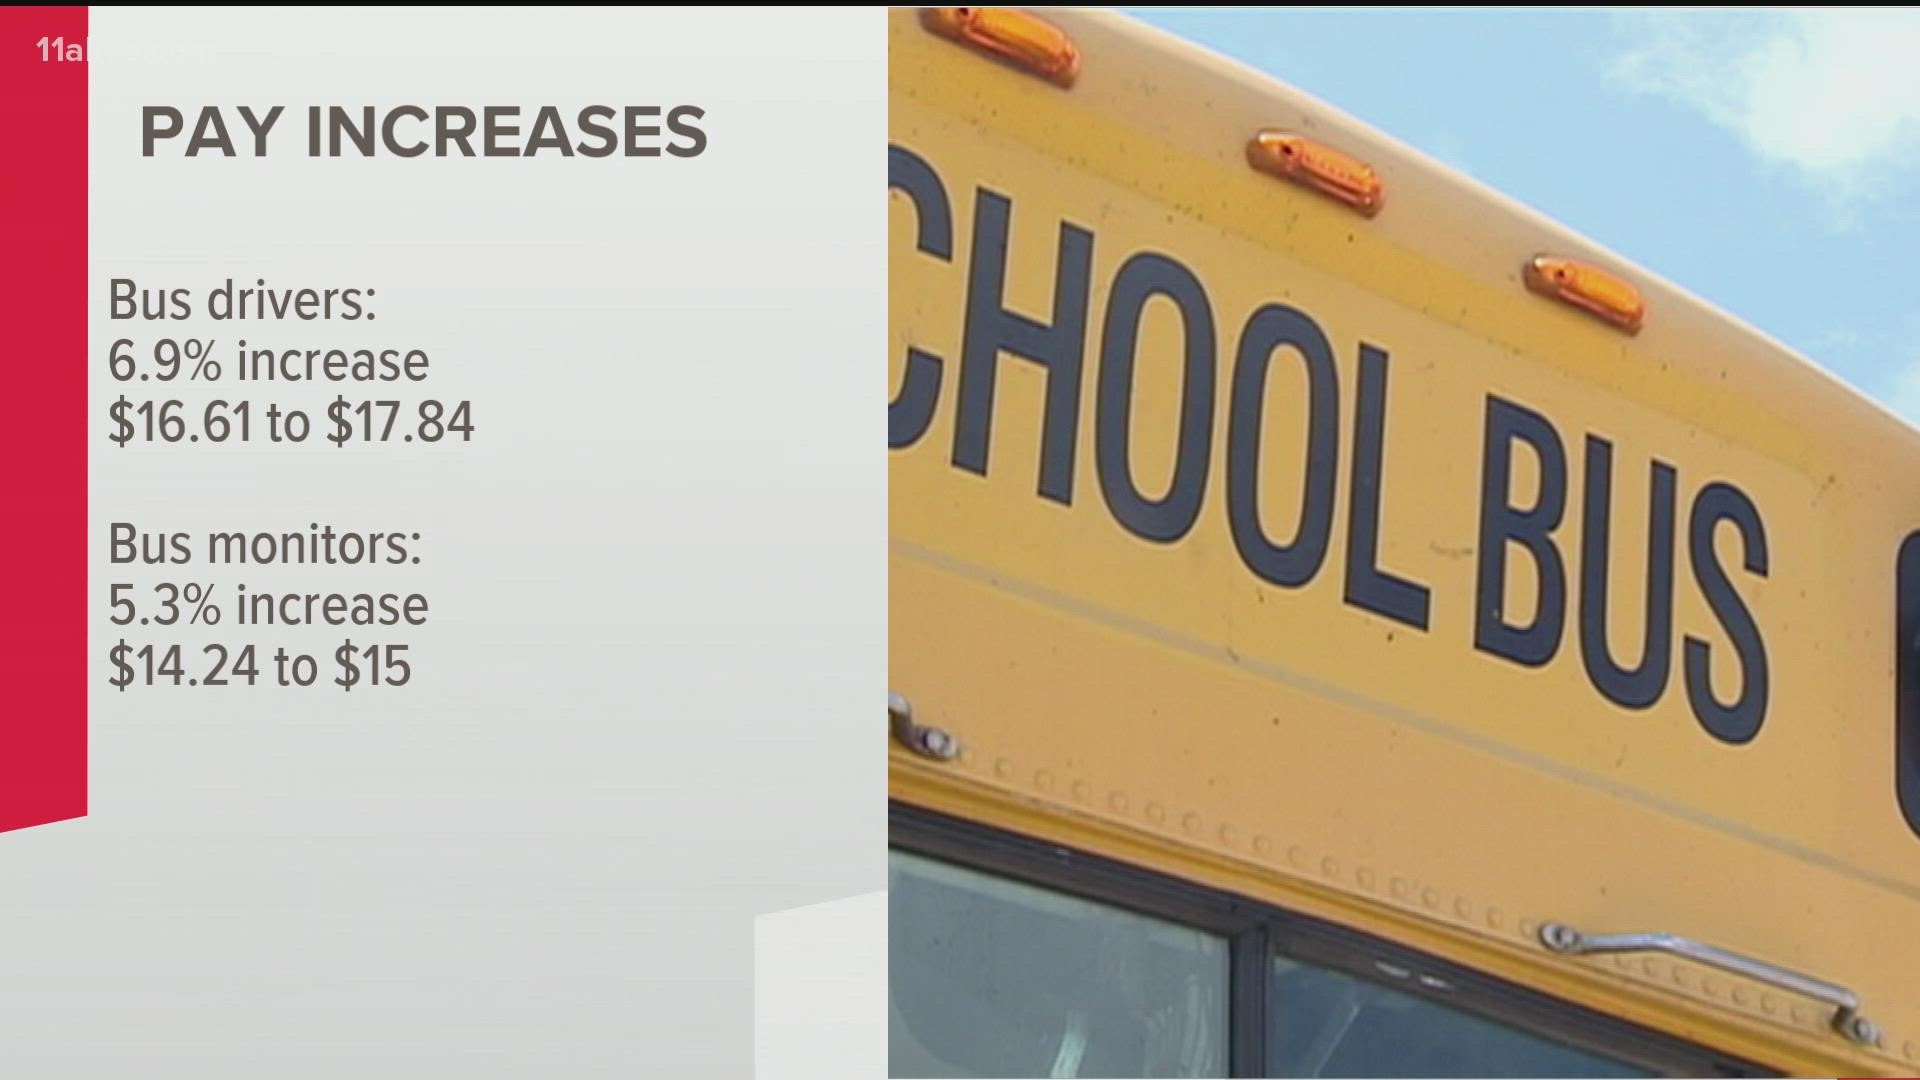 The school system says they want to be competitive in the job market amid the national and state bus driver shortage.